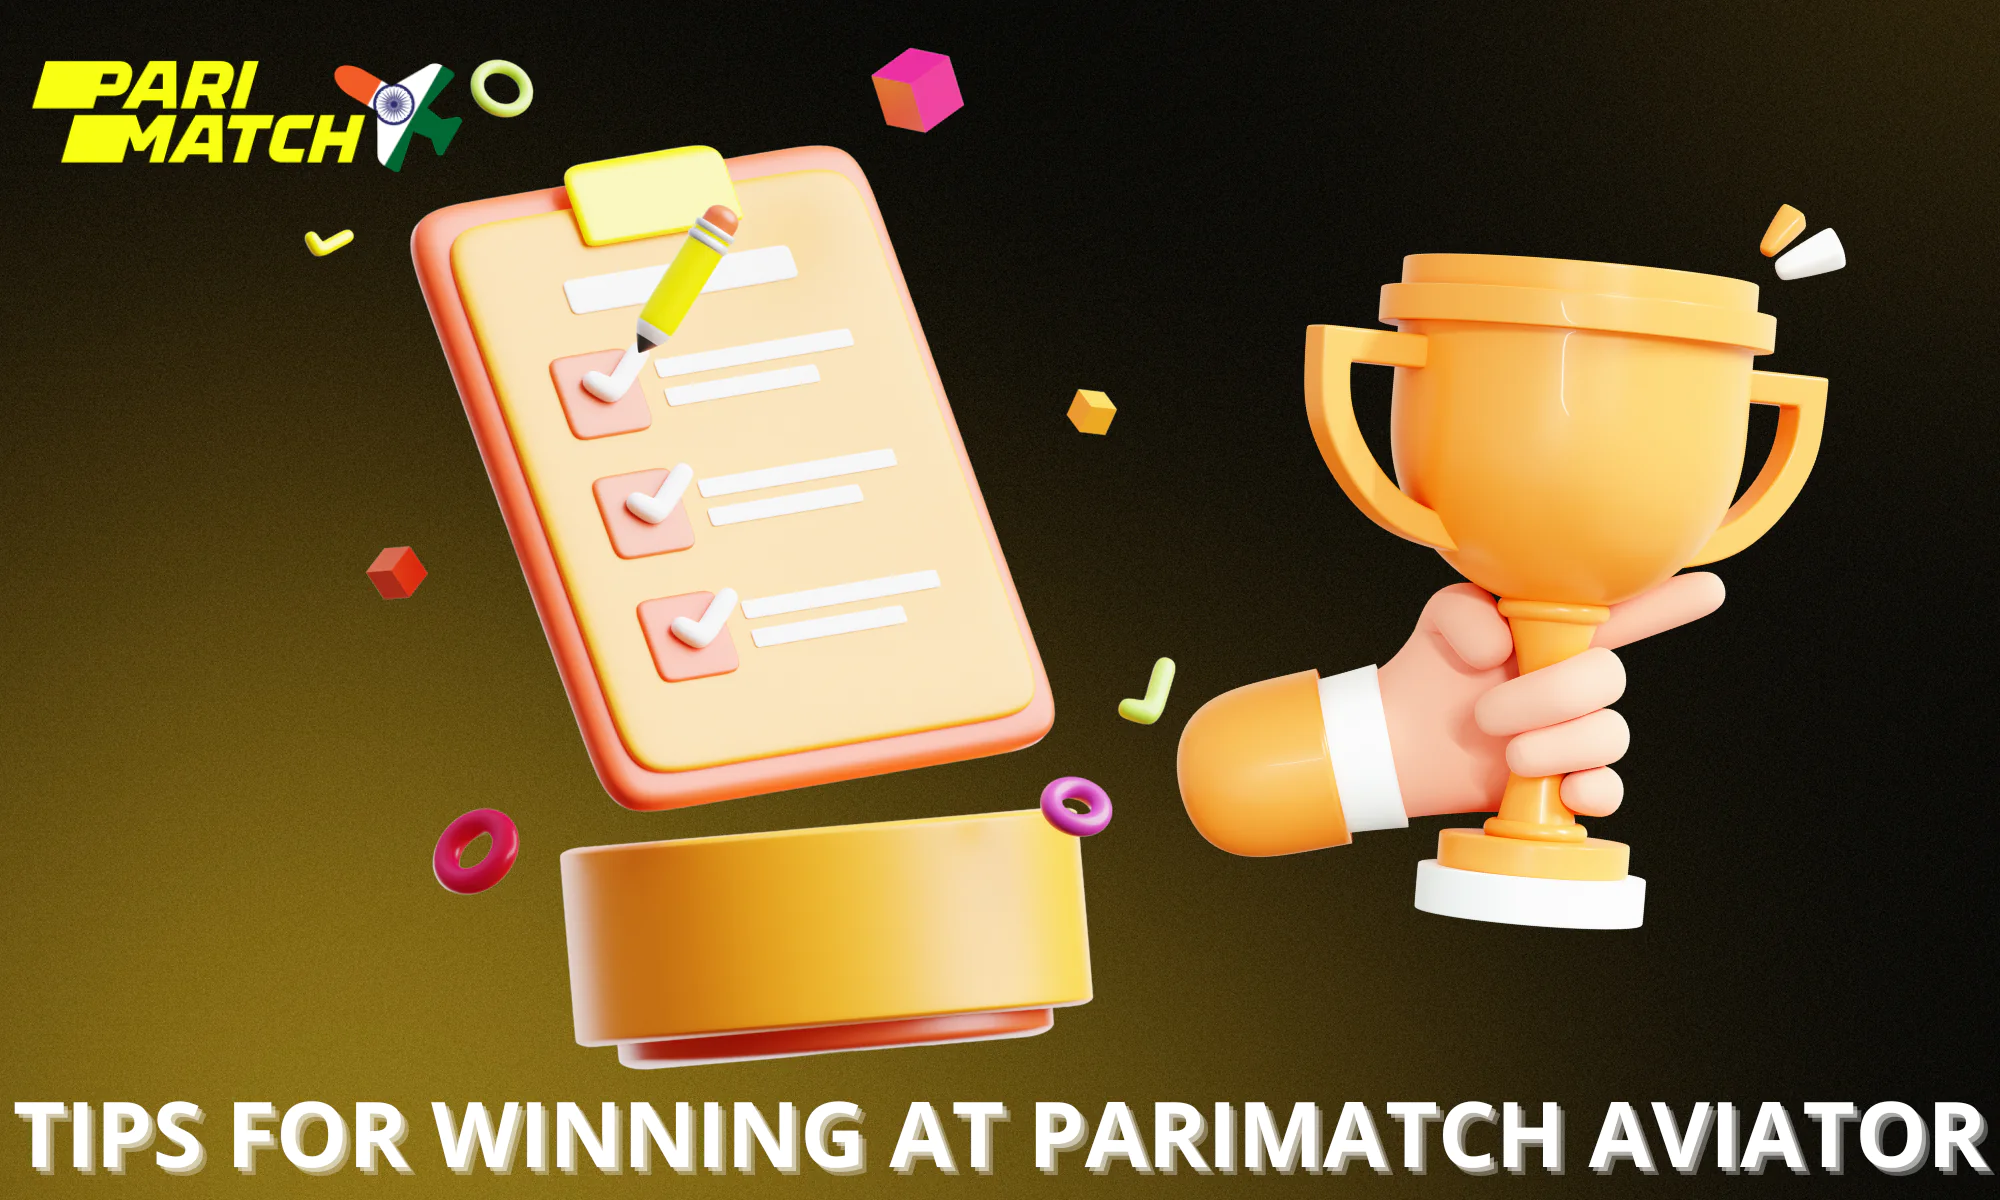 Some tips for winning more often in Parimatch Aviator